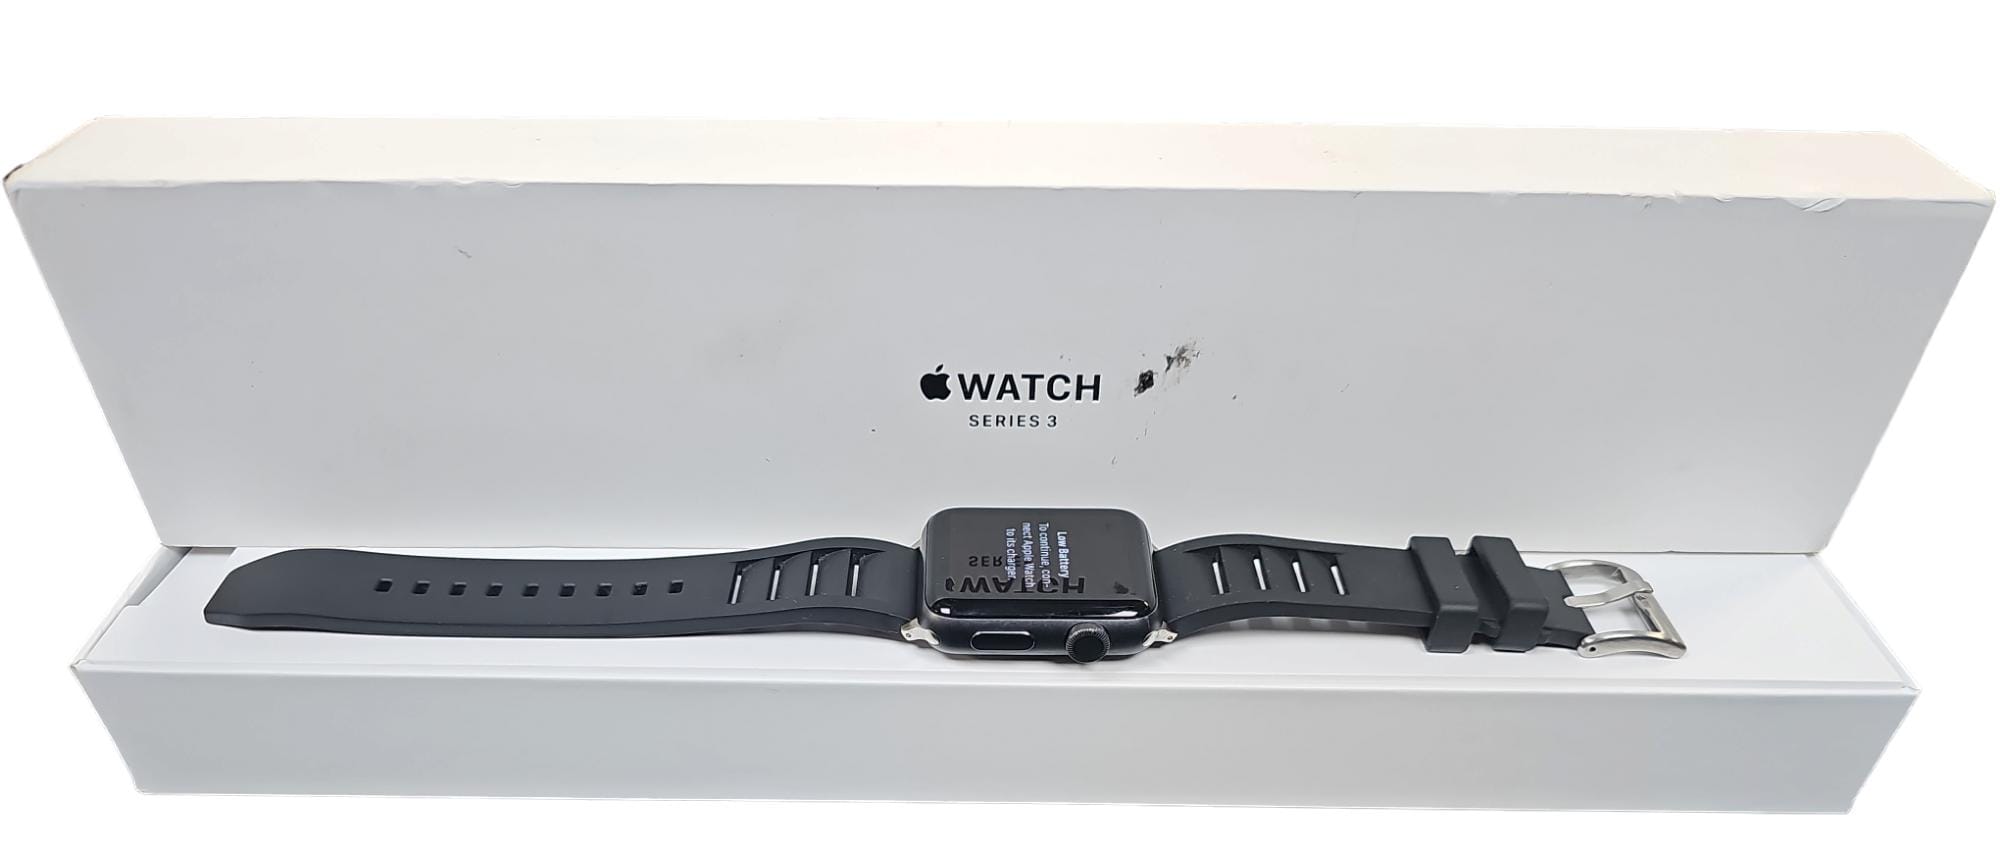 Apple watch series 3 with box